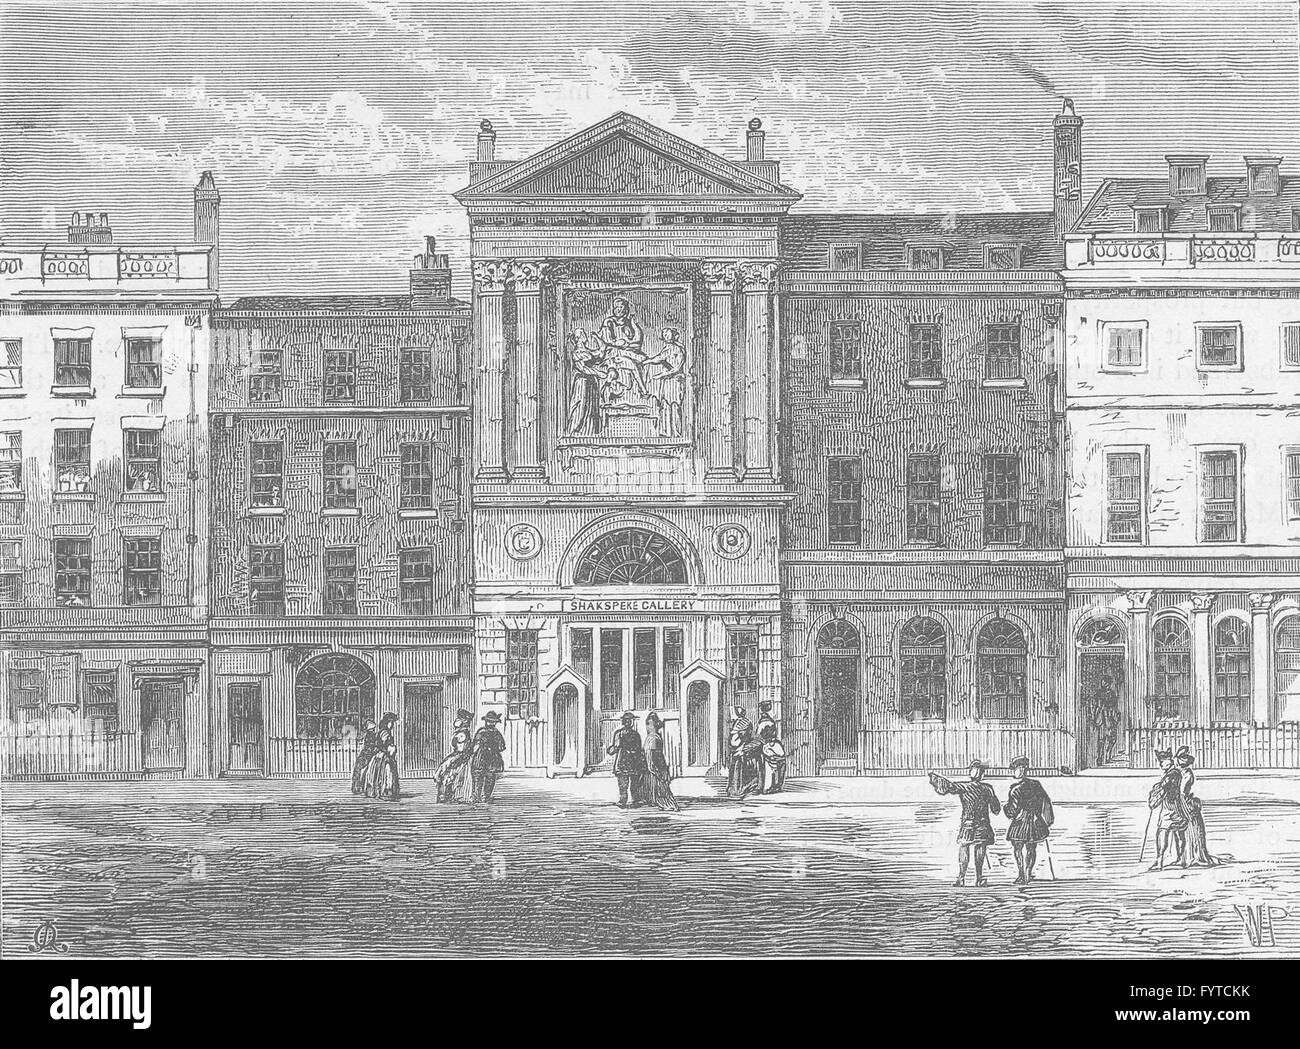 PALL MALL: The Shakespeare Gallery. London, antique print c1880 ...